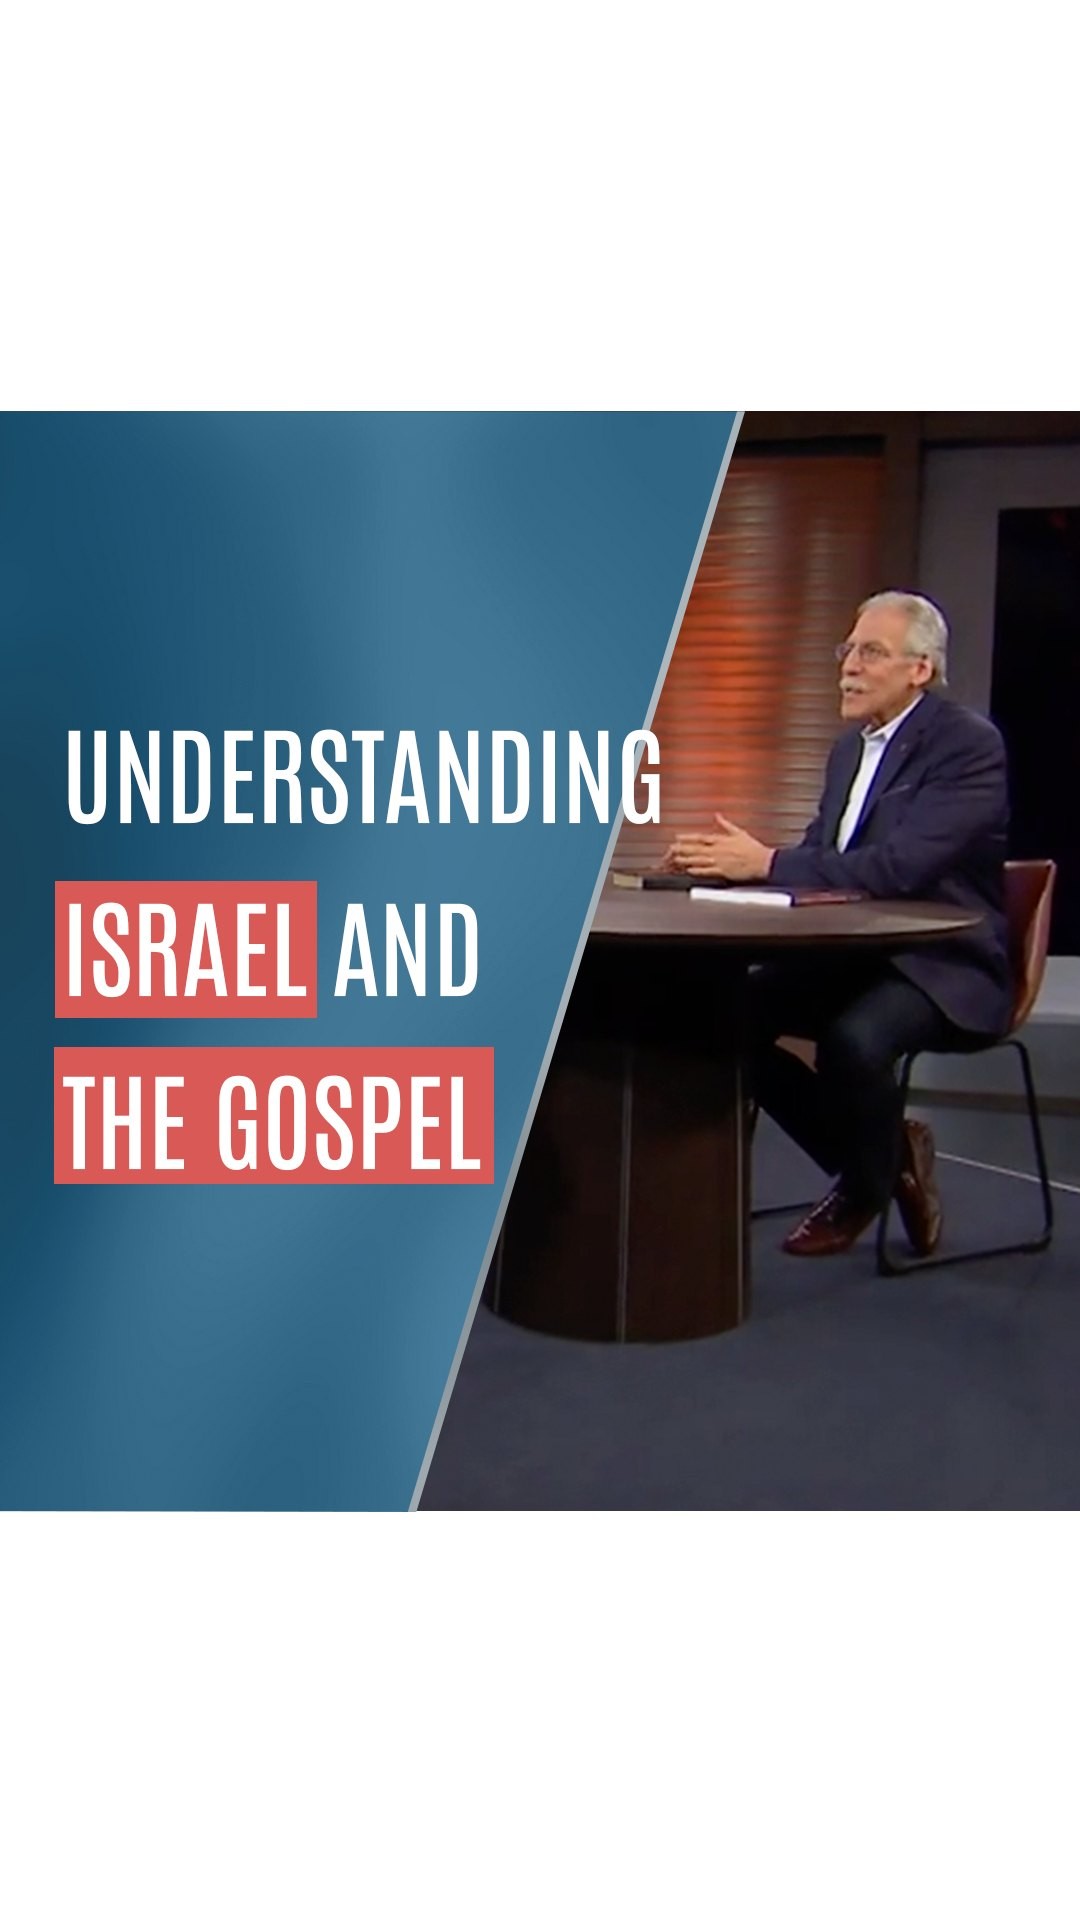 “If you don’t understand Israel, you don’t understand Paul’s Gospel.” So argues Dr. Bob Gladstone in the latest episode of the Ways of the Kingdom Series, Understanding God’s Heart for Israel, where he and Dr. Brown the different questions believers have surrounding this topic.
LINK TO FULL EPISODE IN BIO
#askdrbrown #drmichaelbrown #israel #israel2022 #thegospel